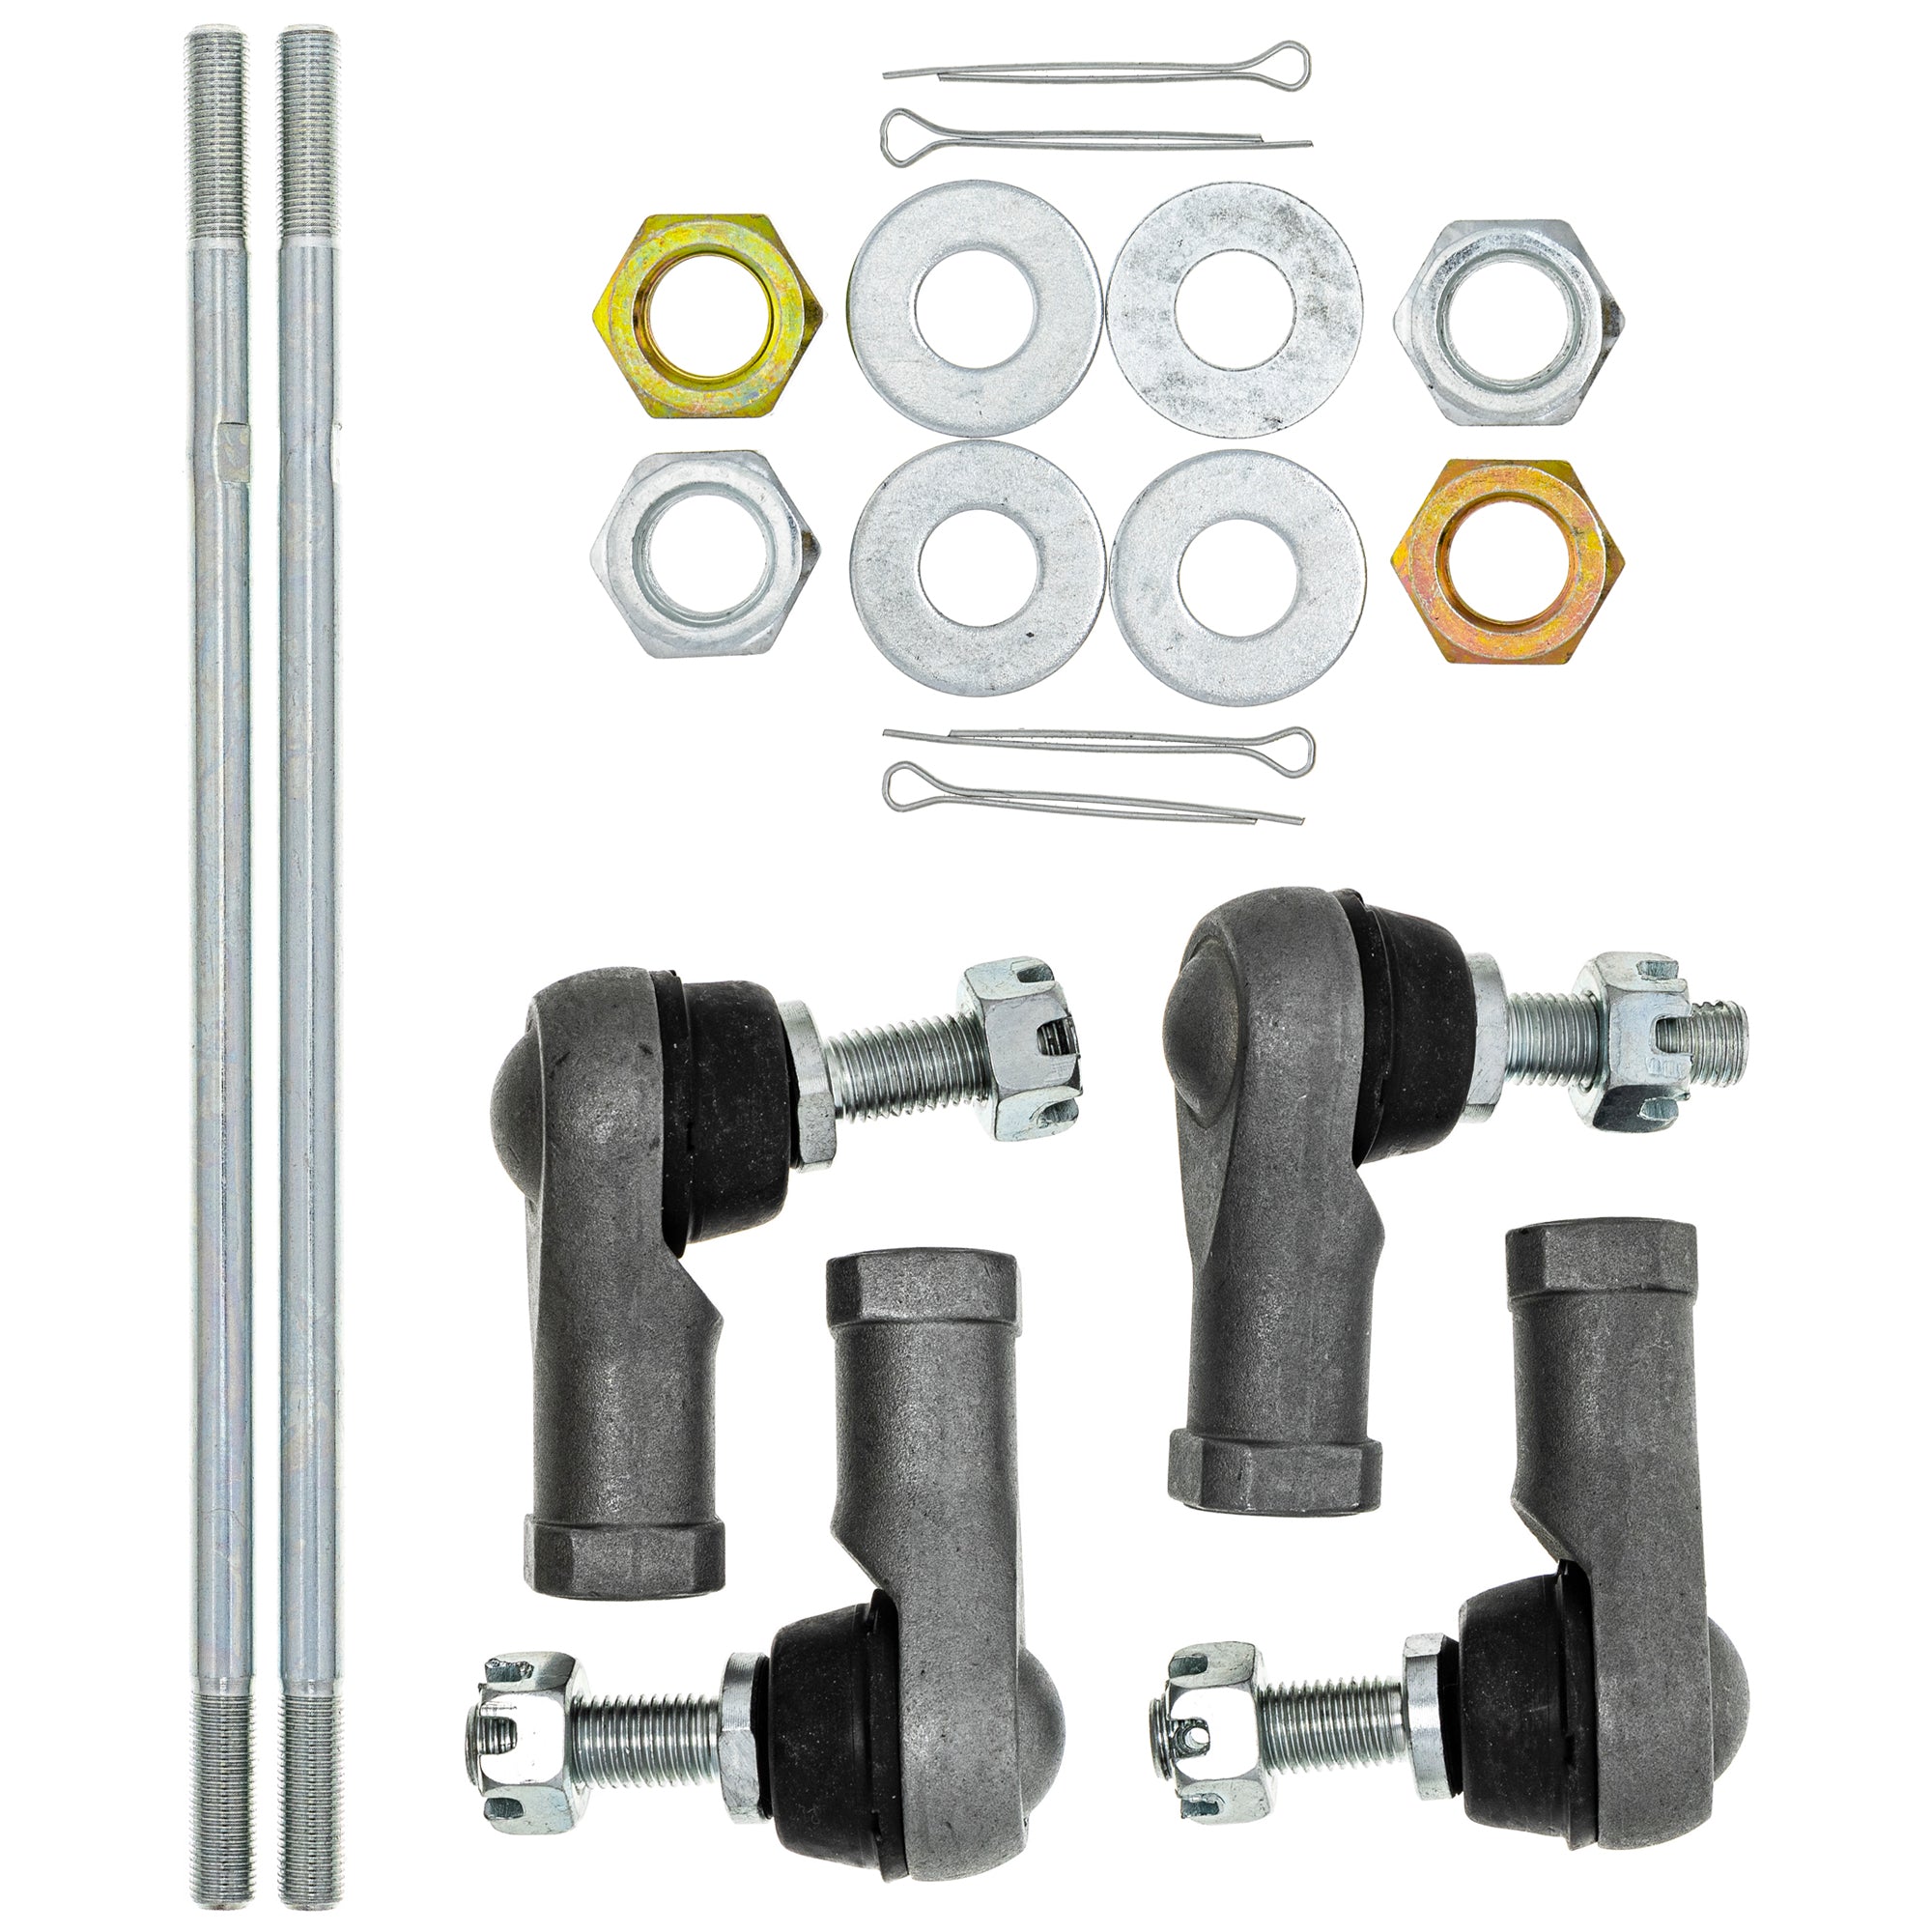 Tie Rods & Tie Rods Ends Kit for zOTHER Polaris Brute NICHE MK1006212